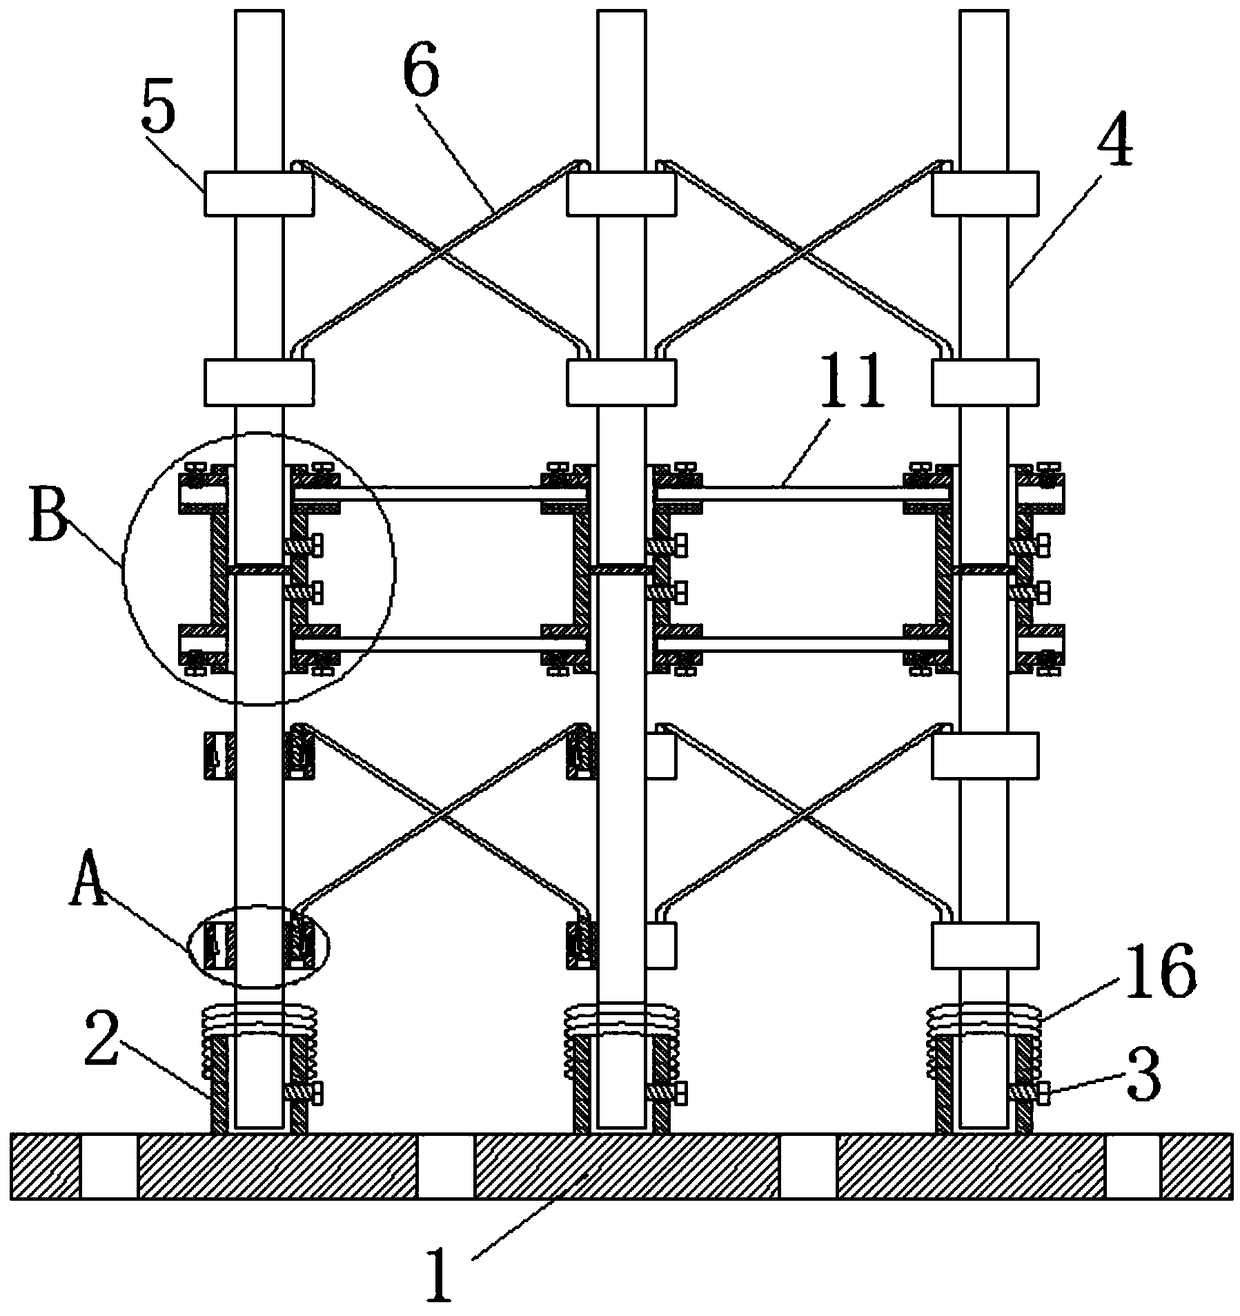 Steel bar connecting structure of prefabricated cement component